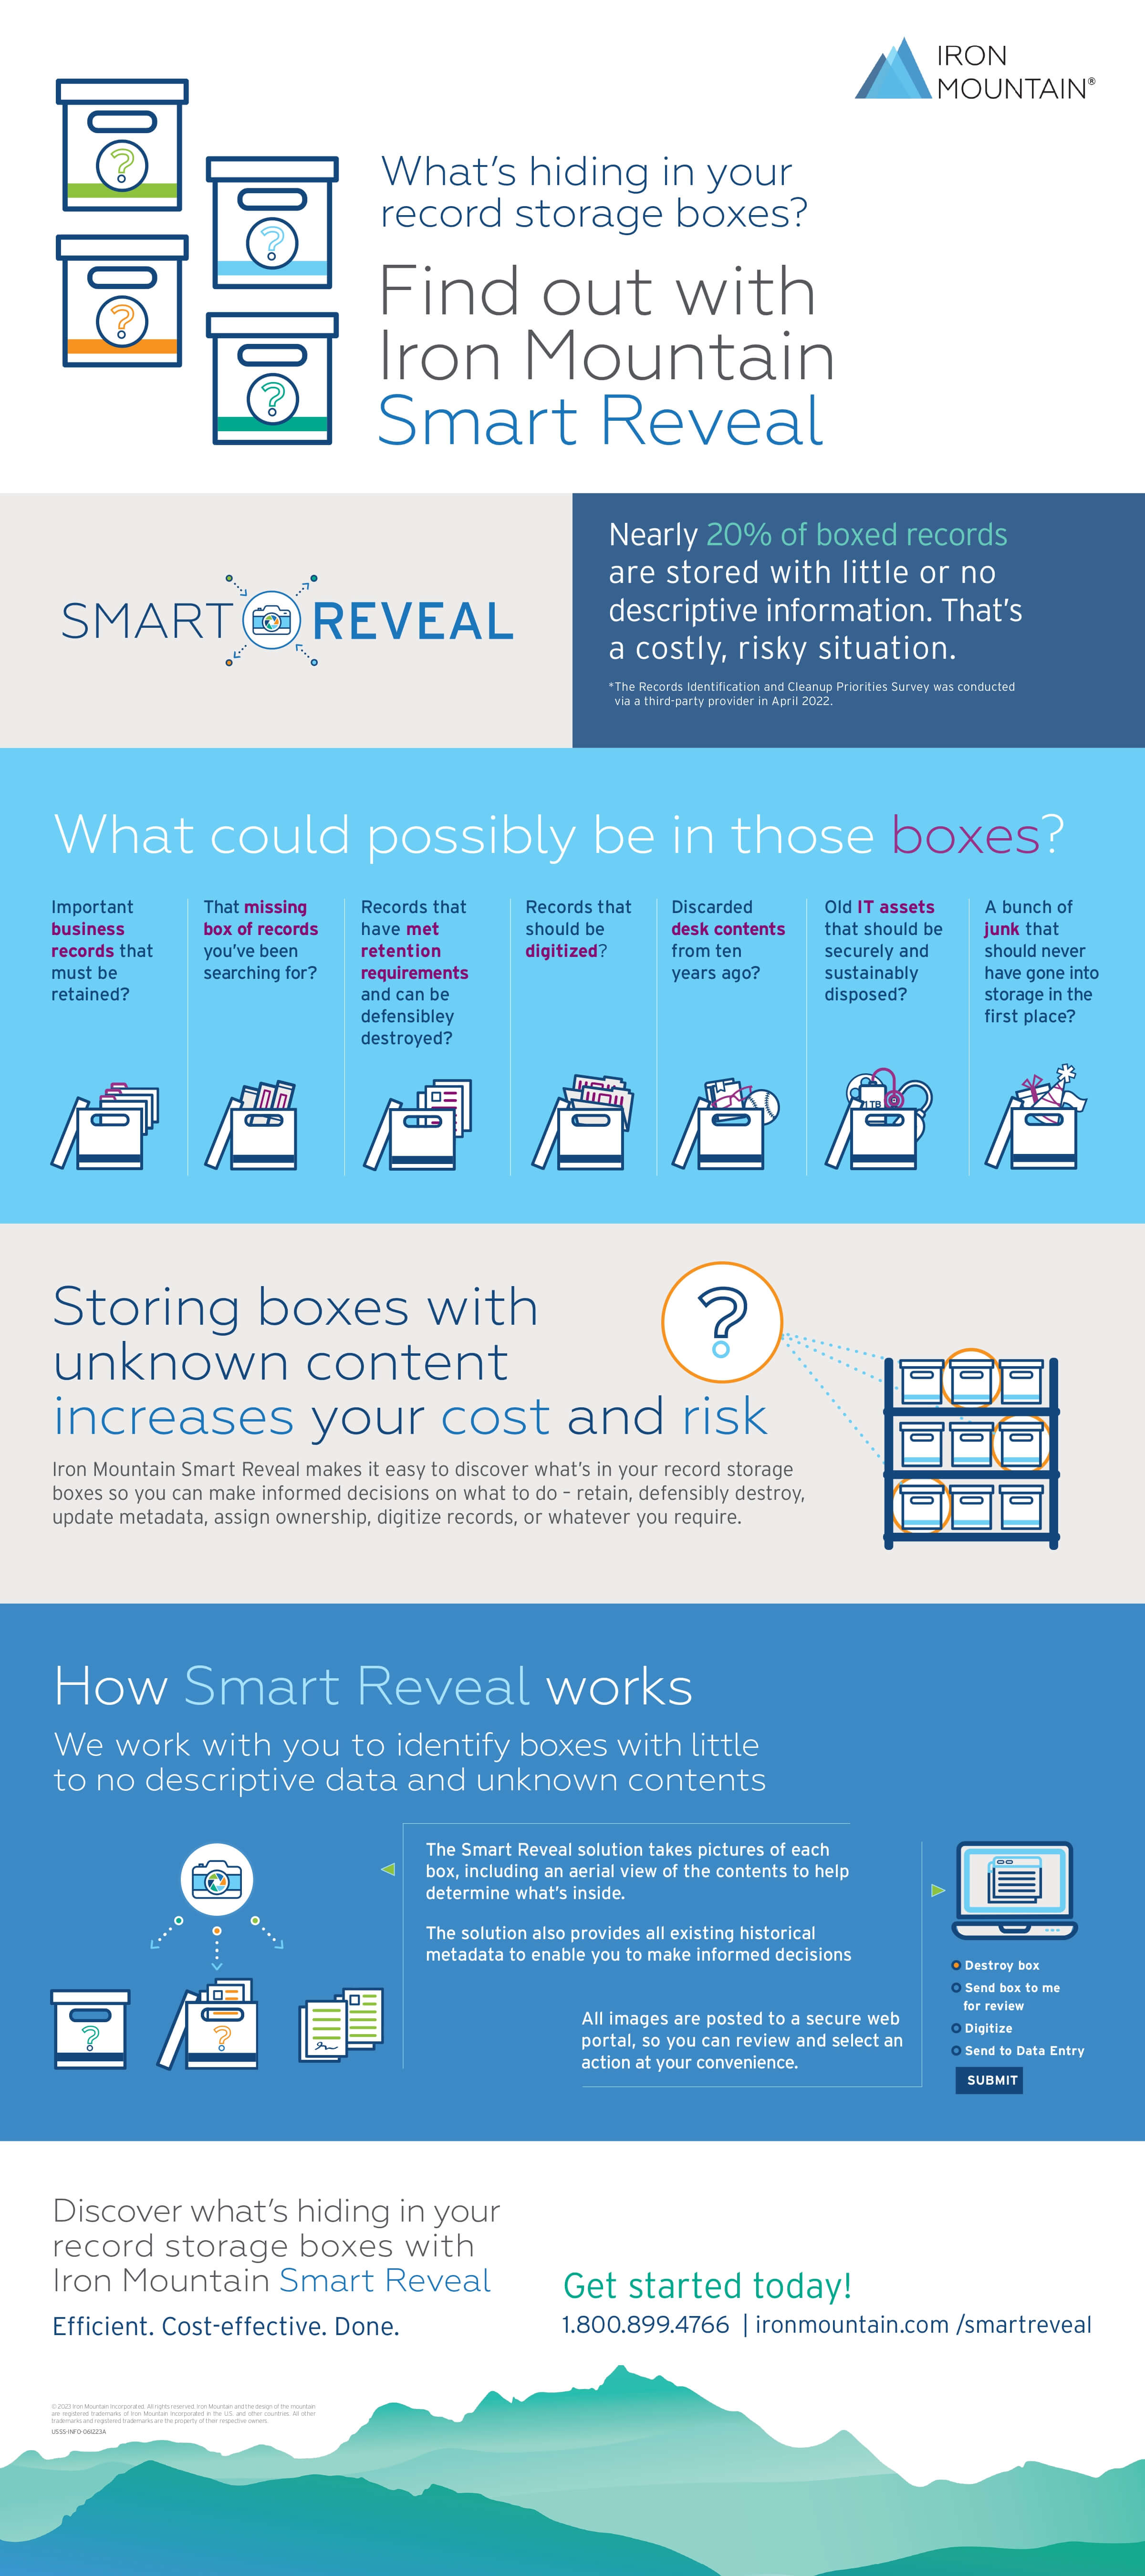 Nearly 20% Of Boxed Records Are Stored With Little Or No Descriptive Information. That’s A Costly, Risky Situation.